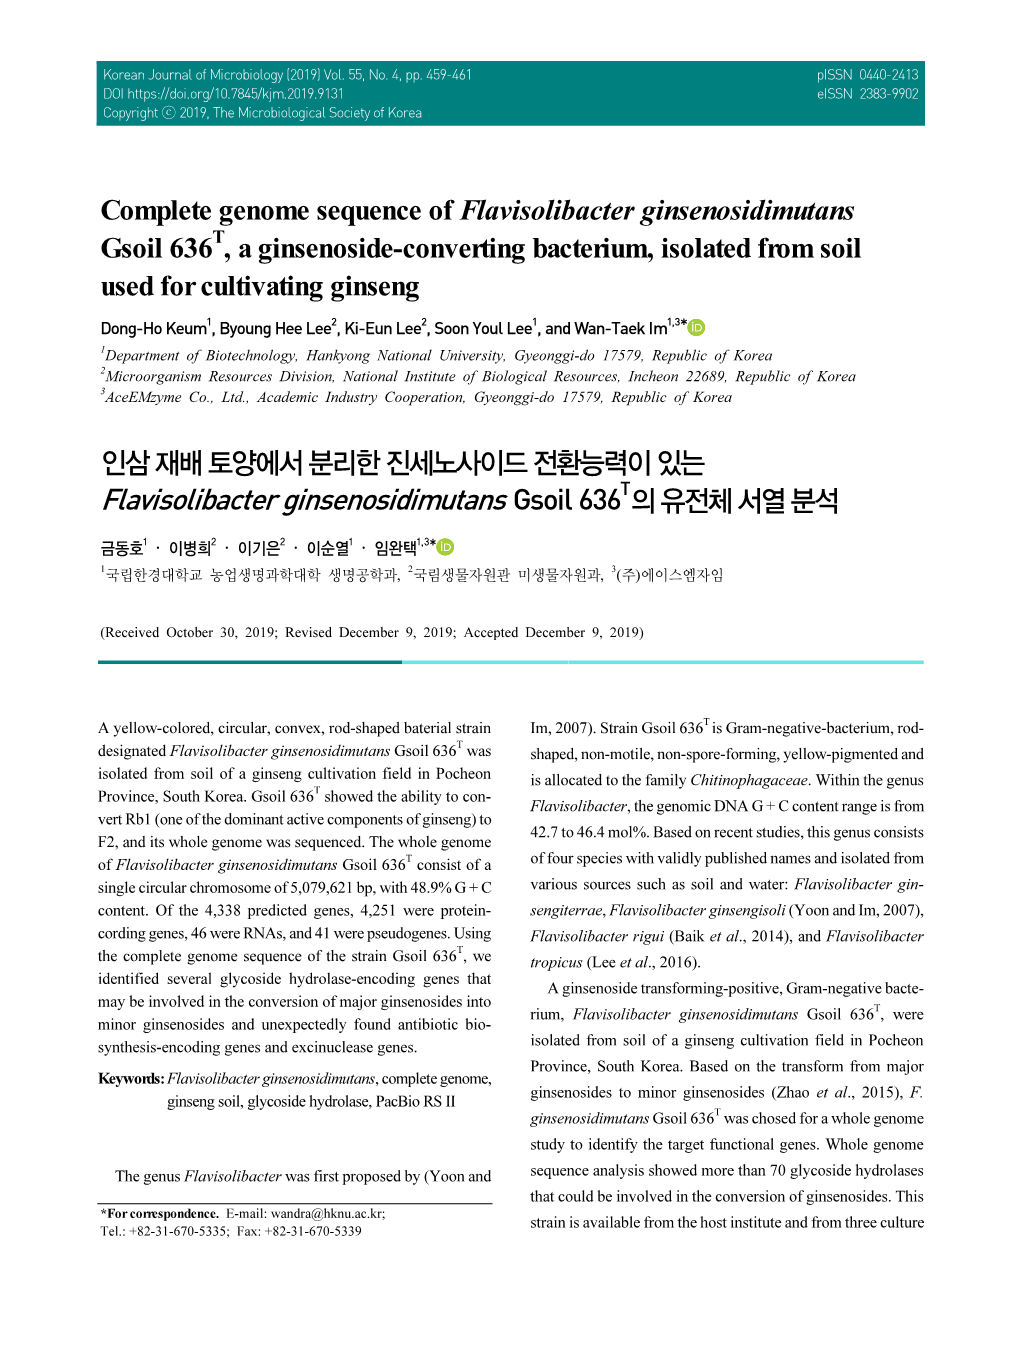 Complete Genome Sequence of Flavisolibacter Ginsenosidimutans T Gsoil 636 , a Ginsenoside-Converting Bacterium, Isolated from Soil Used for Cultivating Ginseng